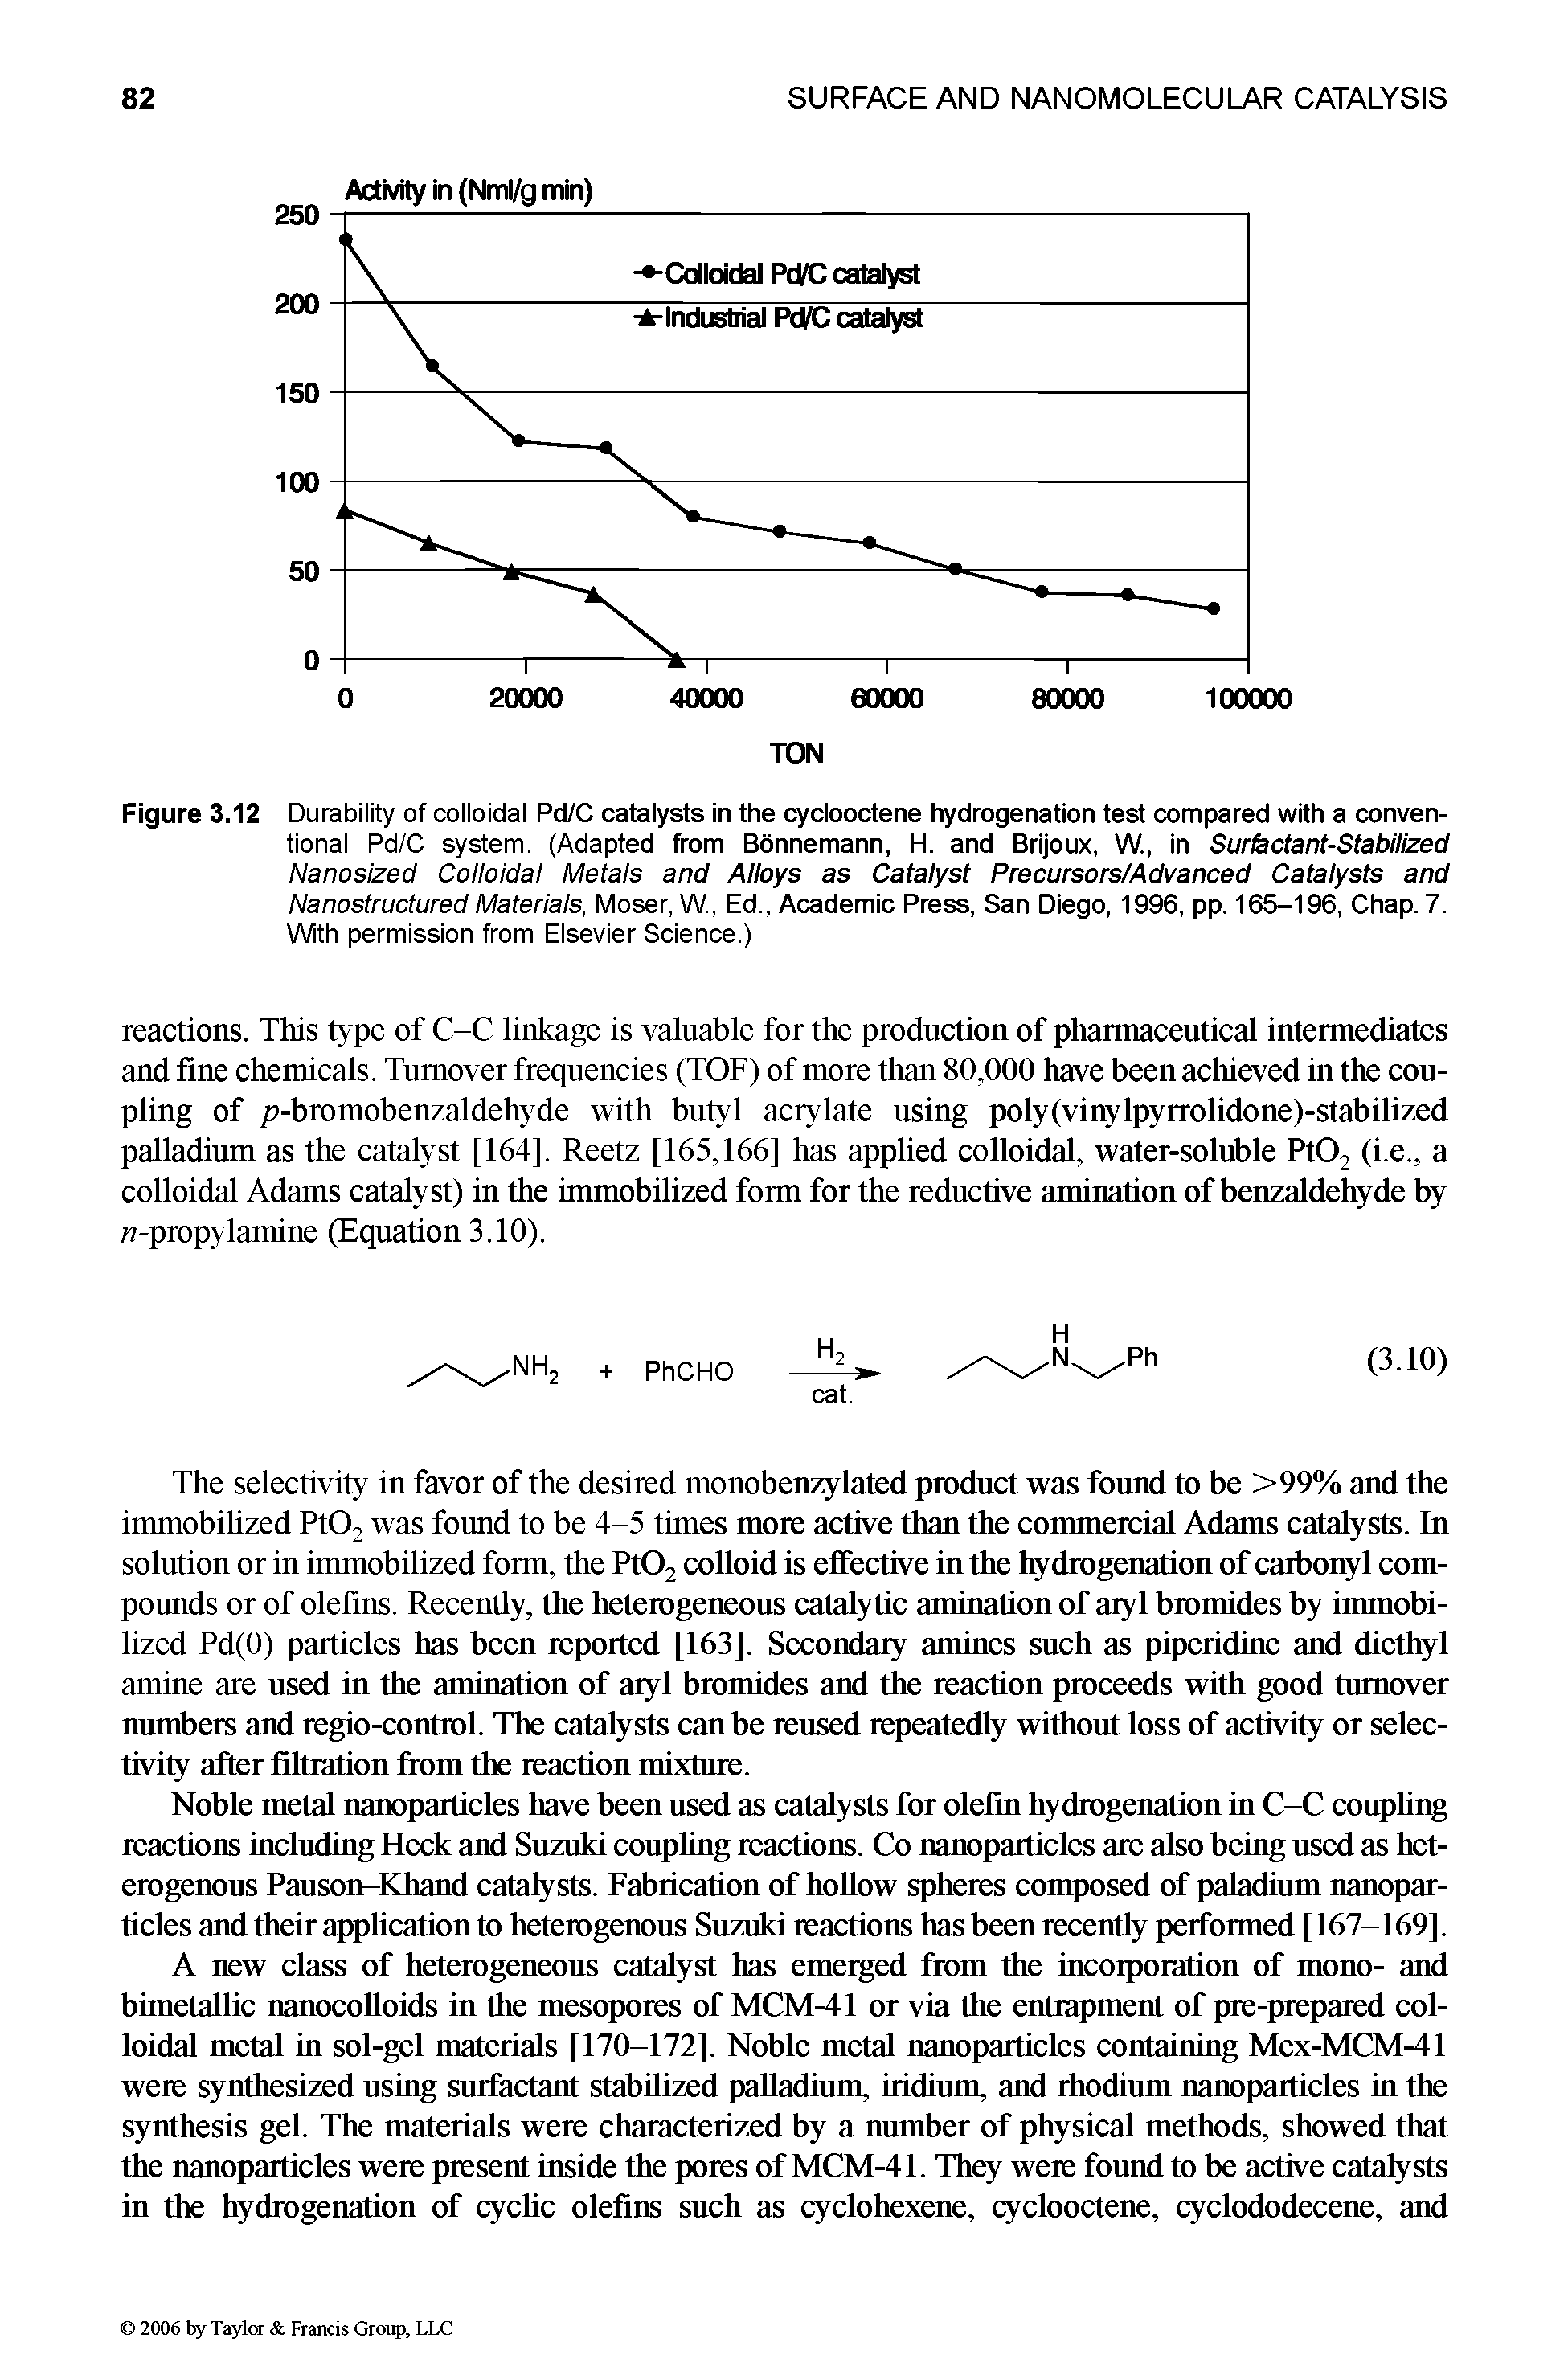 Figure 3.12 Durability of colloidal Pd/C catalysts in the cyclooctene hydrogenation test compared with a conventional Pd/C system. (Adapted from Bonnemann, H. and Brijoux, W., in Surfactant-Stabilized Nanosized Colloidal Metals and Alloys as Catalyst Precursors/Advanced Catalysts and Nanostructured Materials, Moser, W., Ed., Academic Press, San Diego, 1996, pp. 165-196, Chap. 7. With permission from Elsevier Science.)...